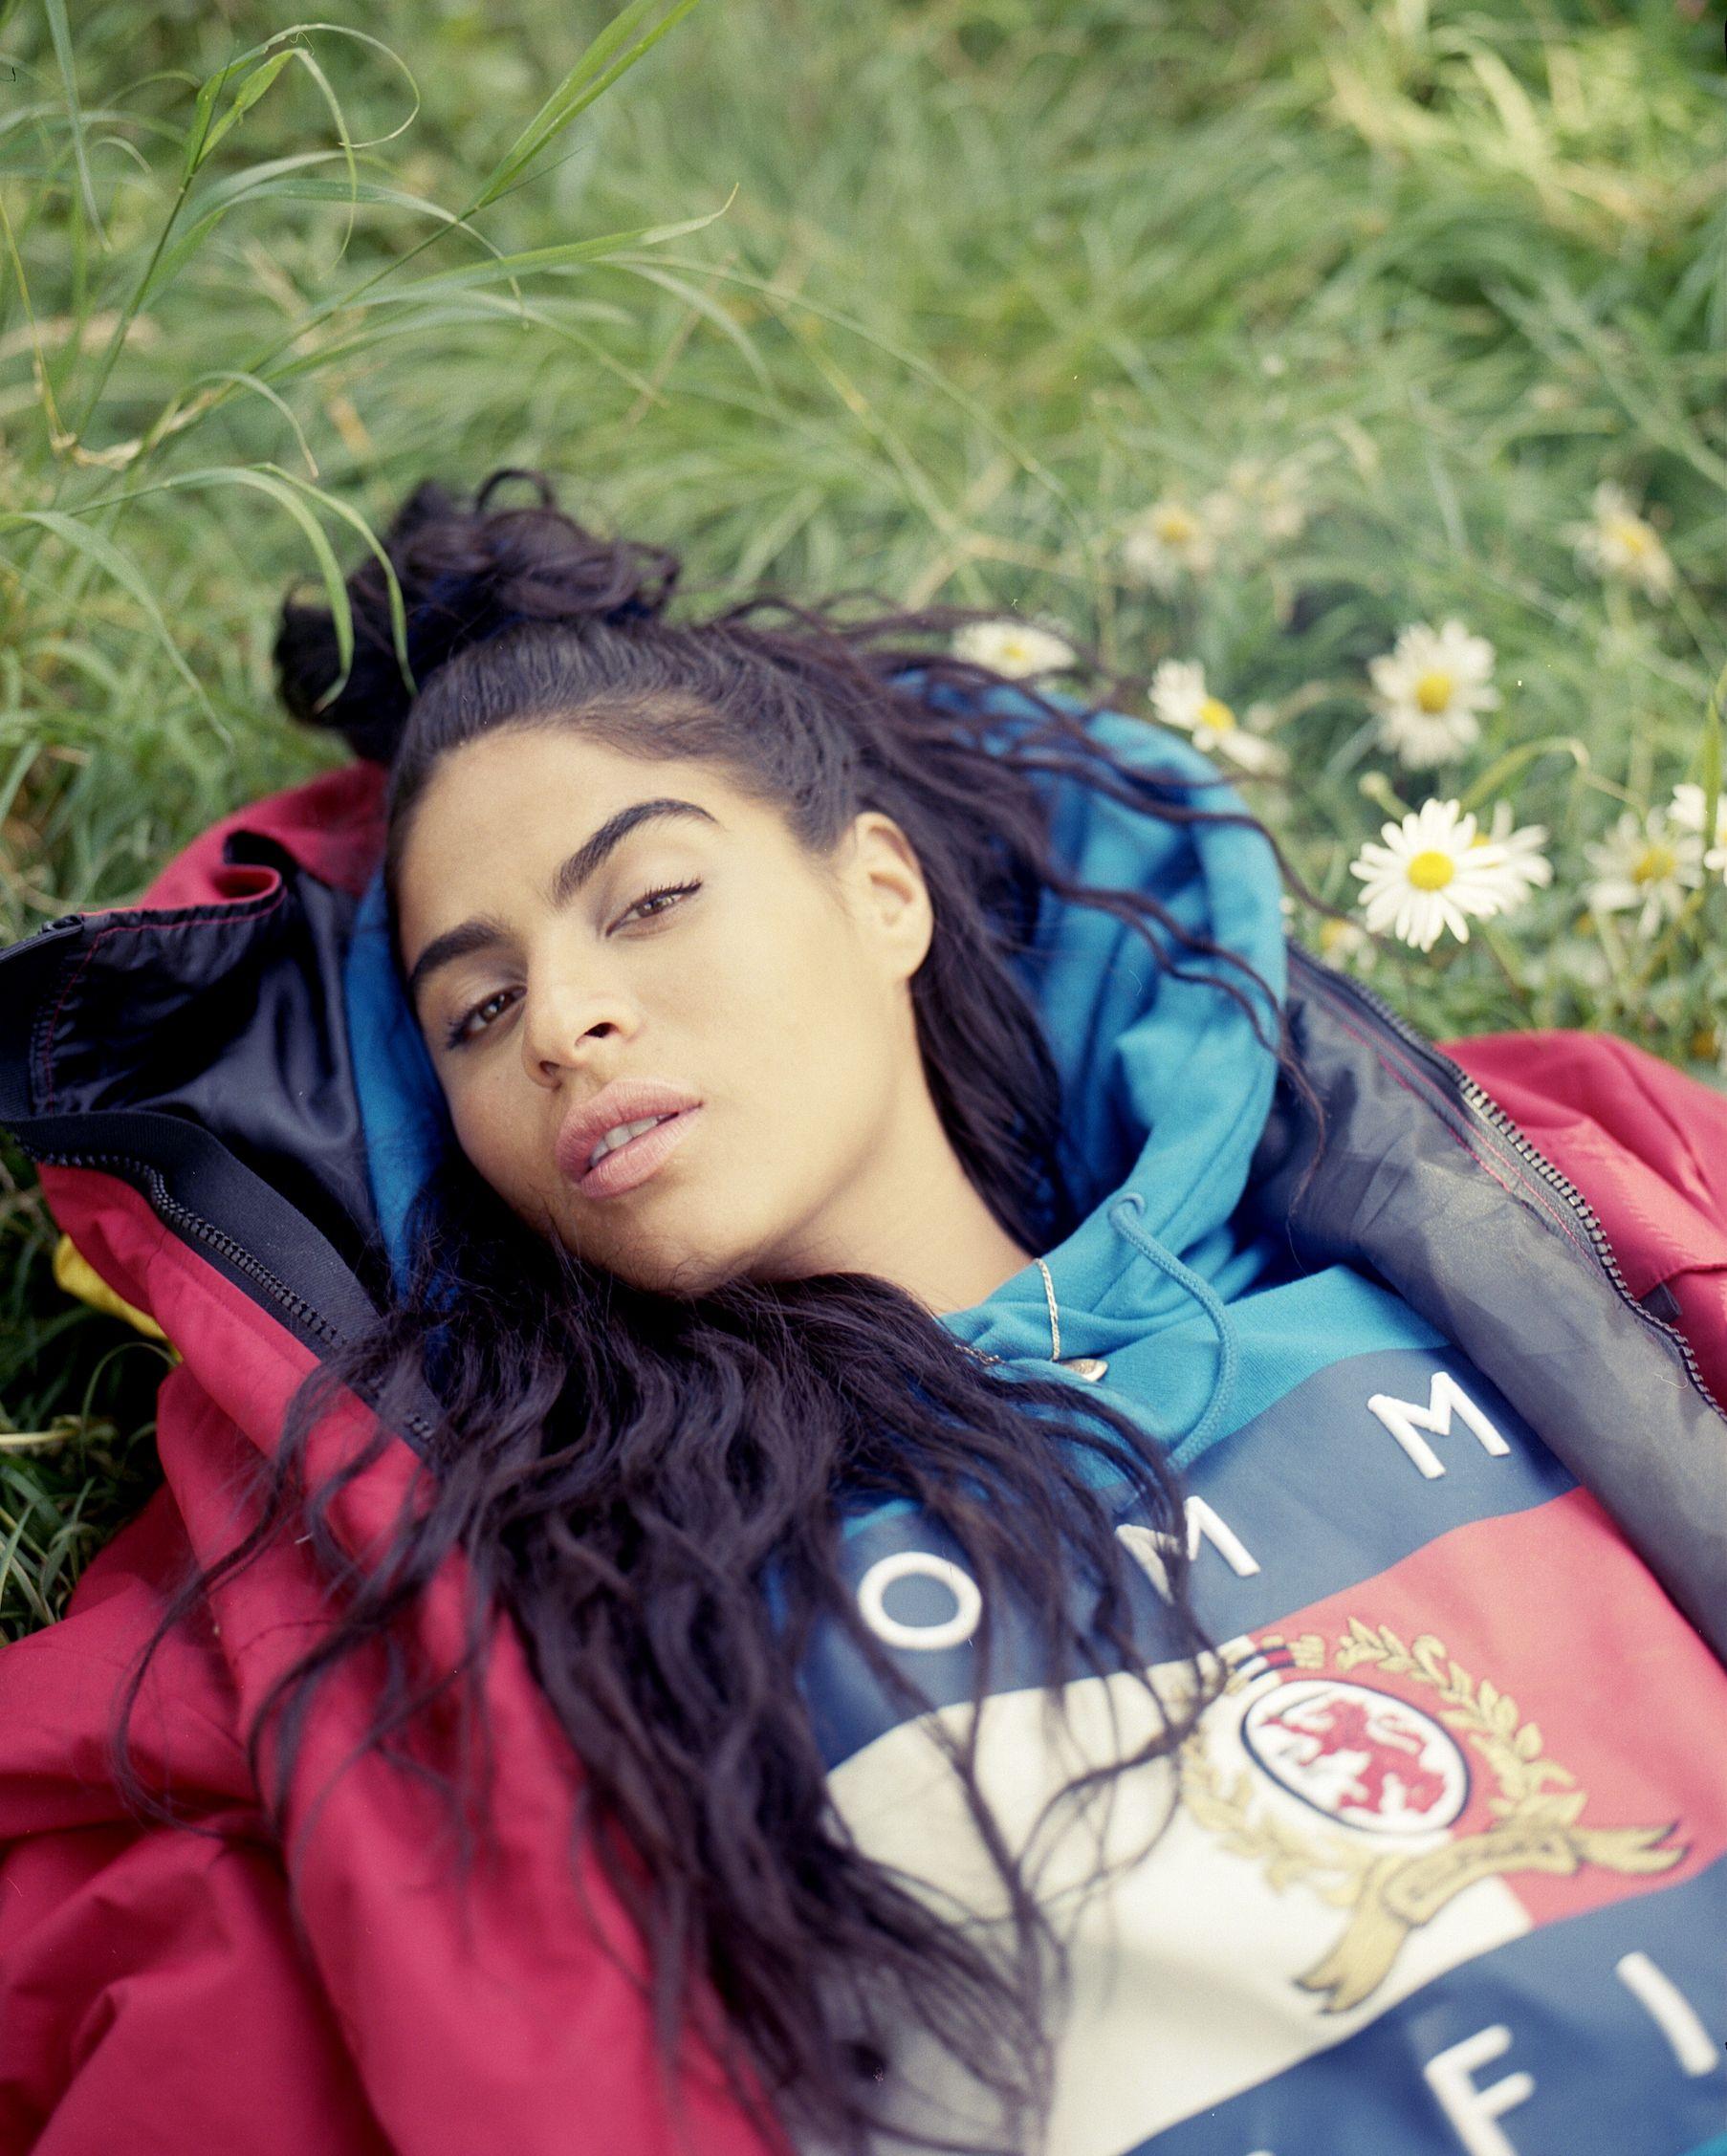 51 Hot Pictures Of Jessie Reyez Will Leave You Flabbergasted By Her Hot Magnificence 15